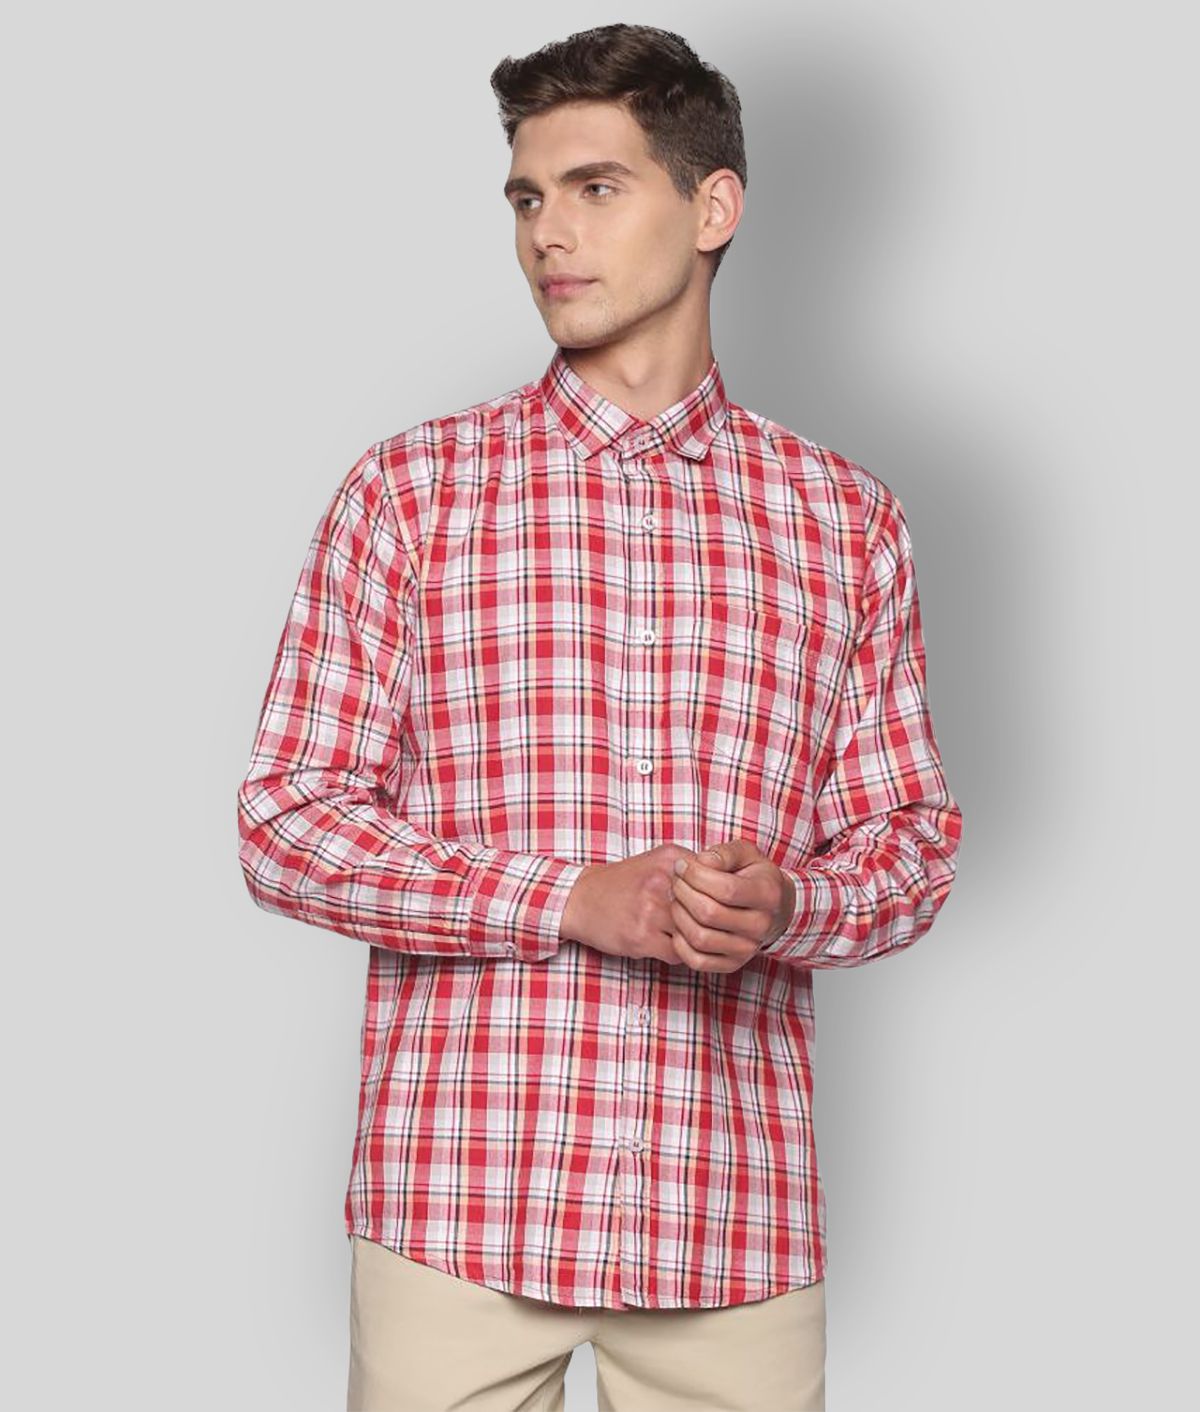     			YHA - Red Cotton Regular Fit Men's Casual Shirt ( Pack of 1 )